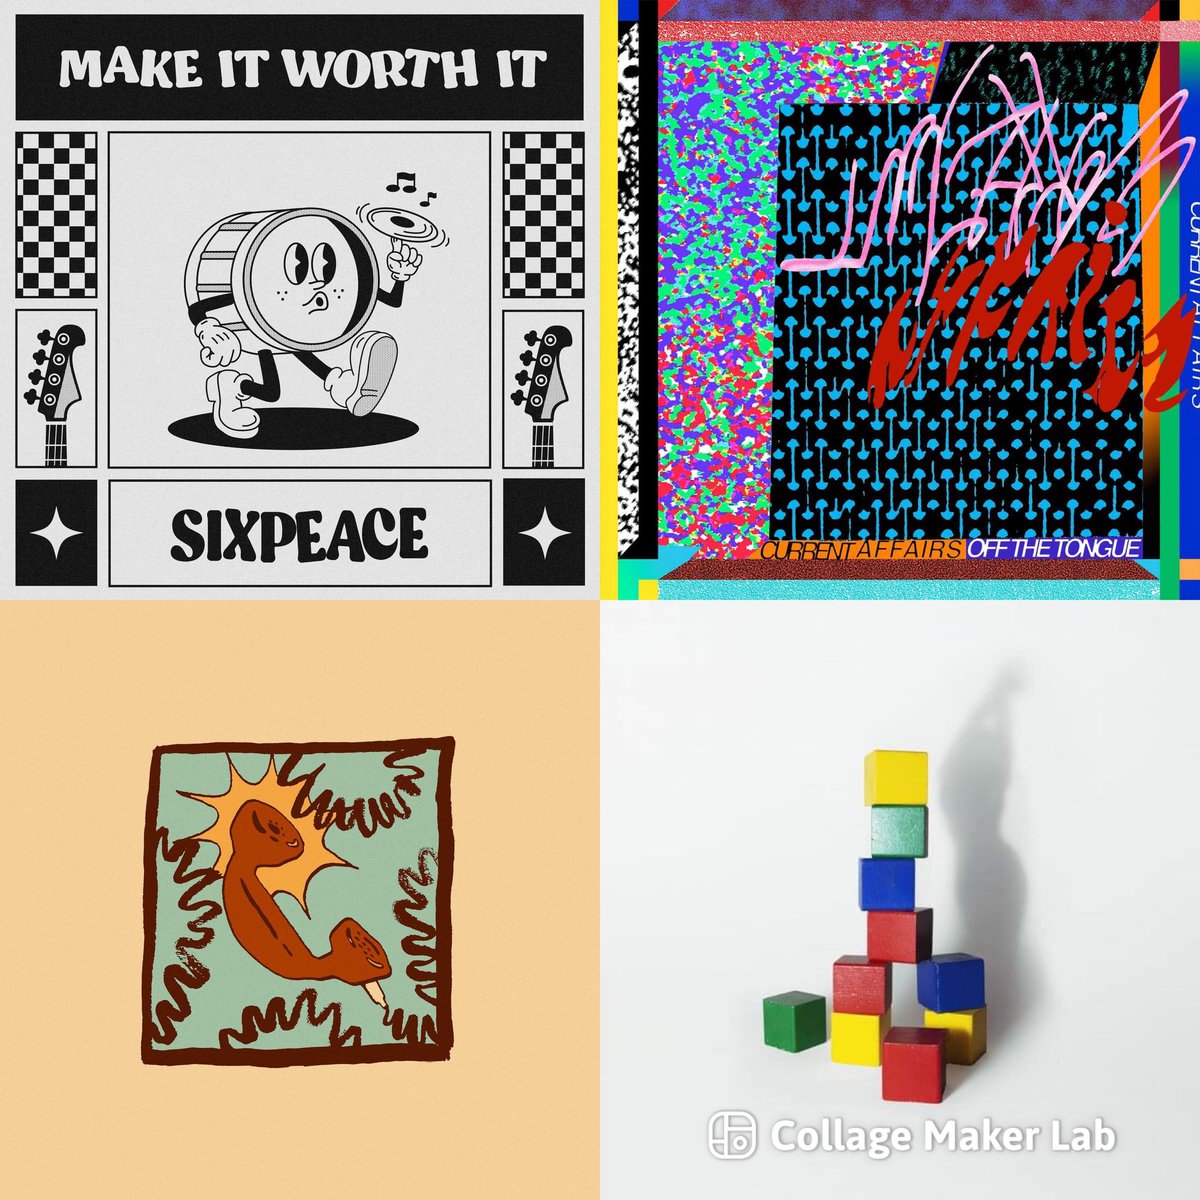 New tracks added to our Best New Scottish Music Playlist featuring:

@sixpeaceband - Make It Worth It
@CurrentAffa1rs - No Fuss @ToughLove
Sulka - Weekend @LostMap
@BarryCantSwim - Woman @ninjatune

open.spotify.com/playlist/5vorH…